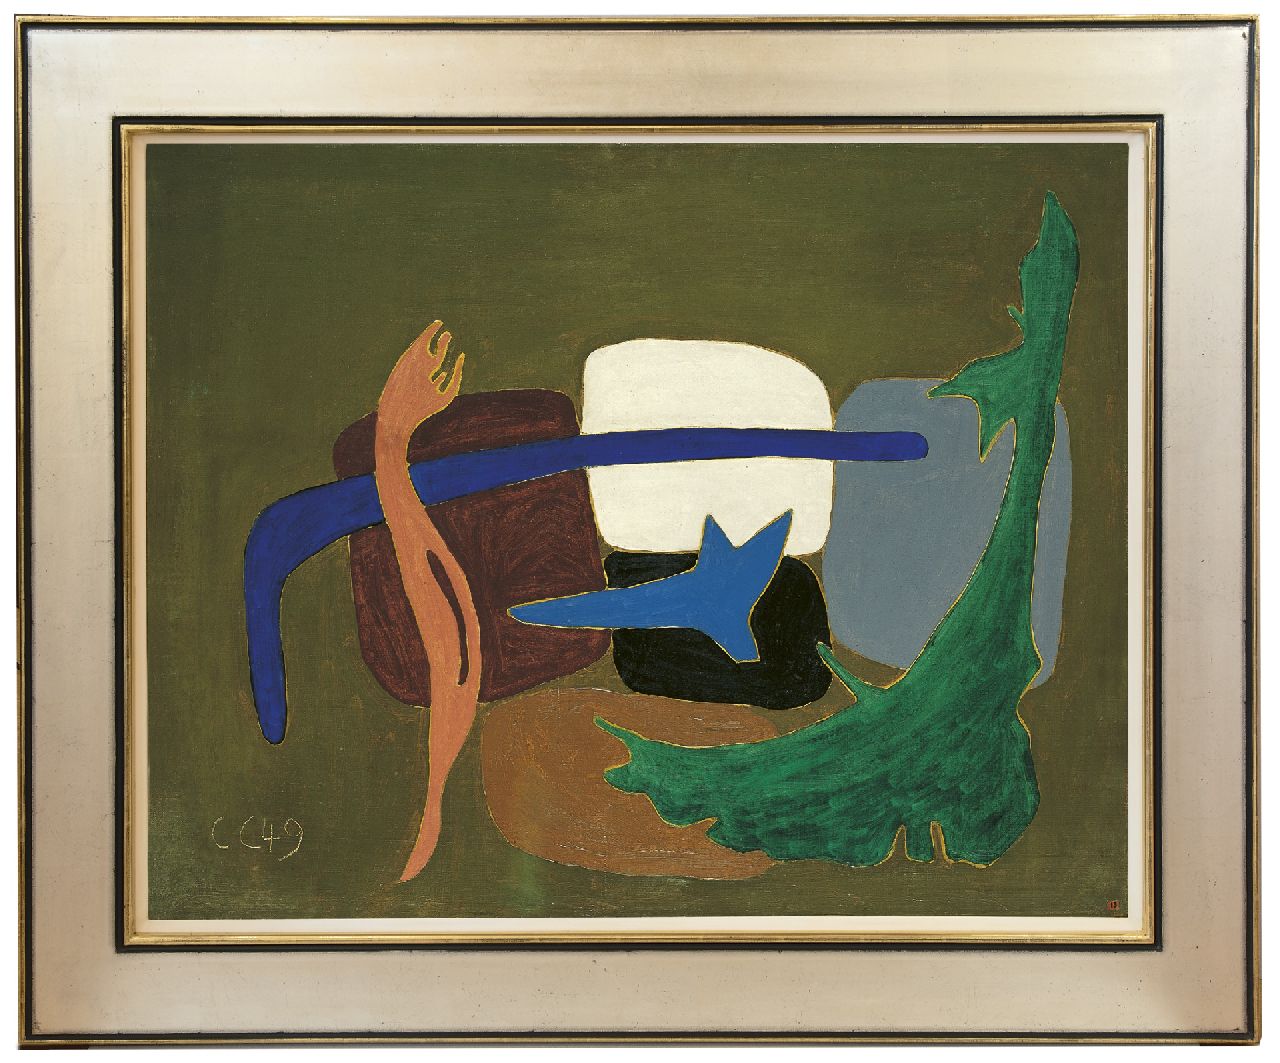 Claus C.  | Camille Claus | Paintings offered for sale | Composition, oil on canvas 73.0 x 91.7 cm, signed l.l. with initials and dated '49